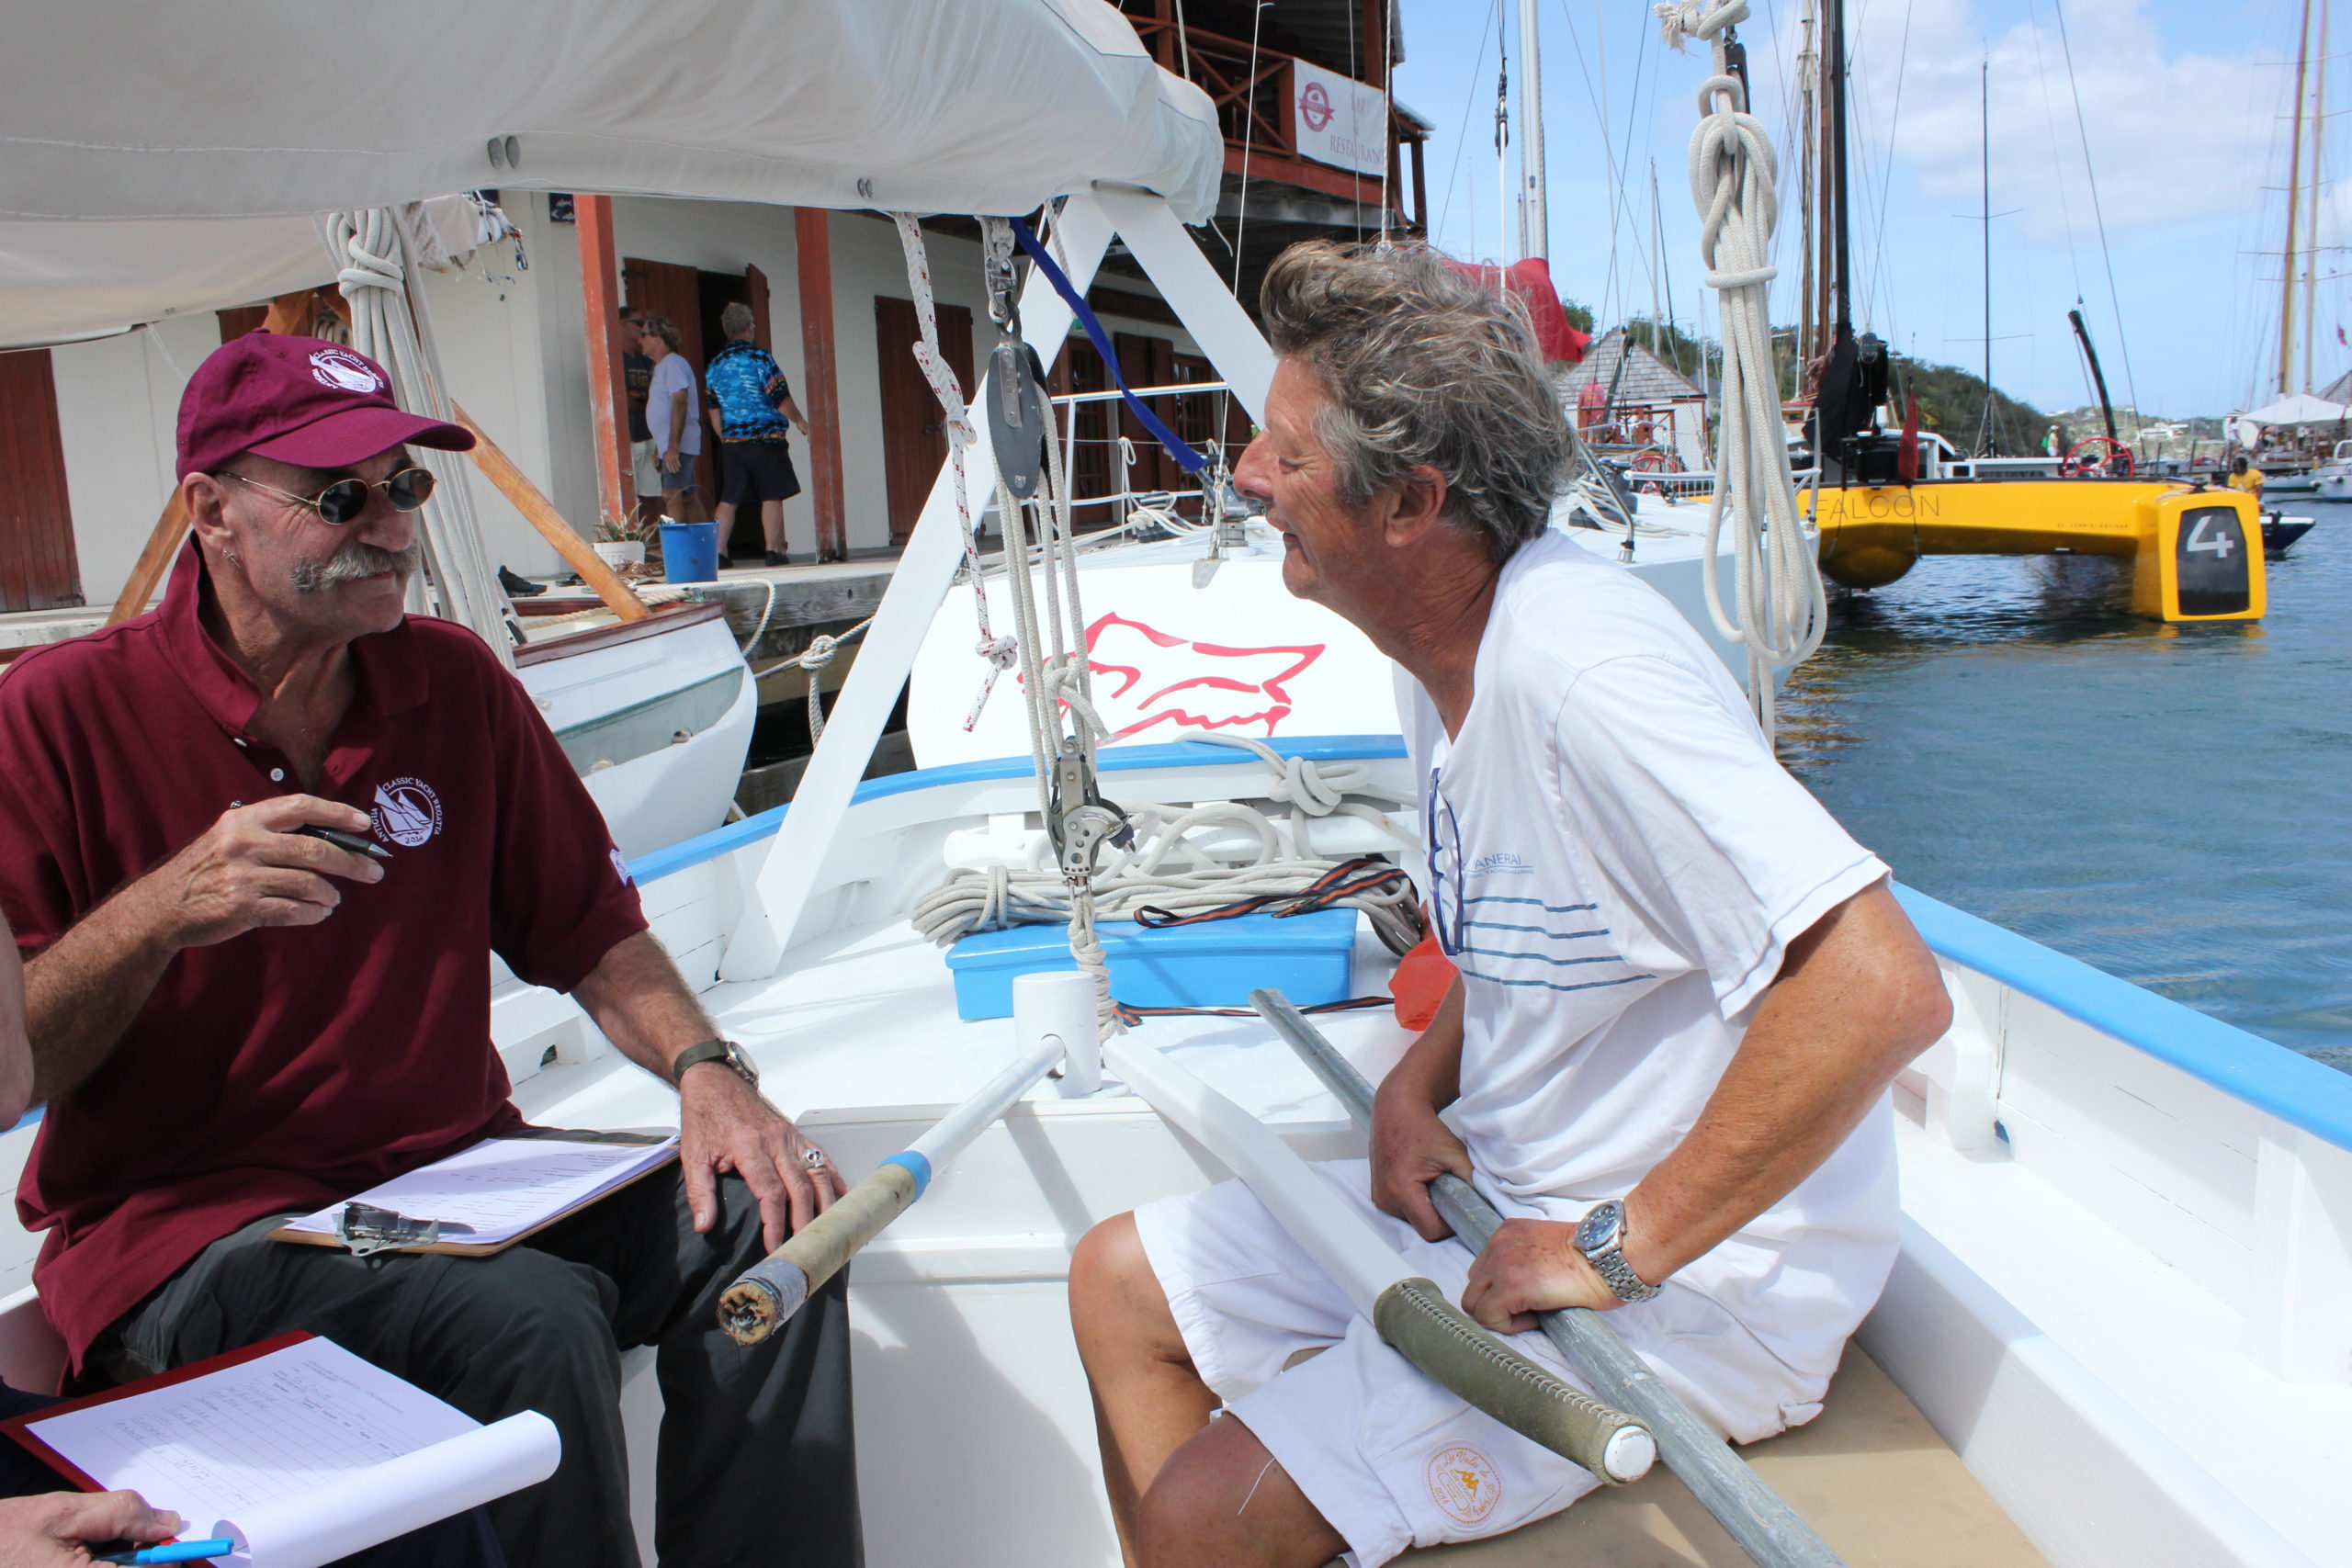 Tom Cunliffe explains the criteria for judging the Concours d’elegance at Antigua Classics